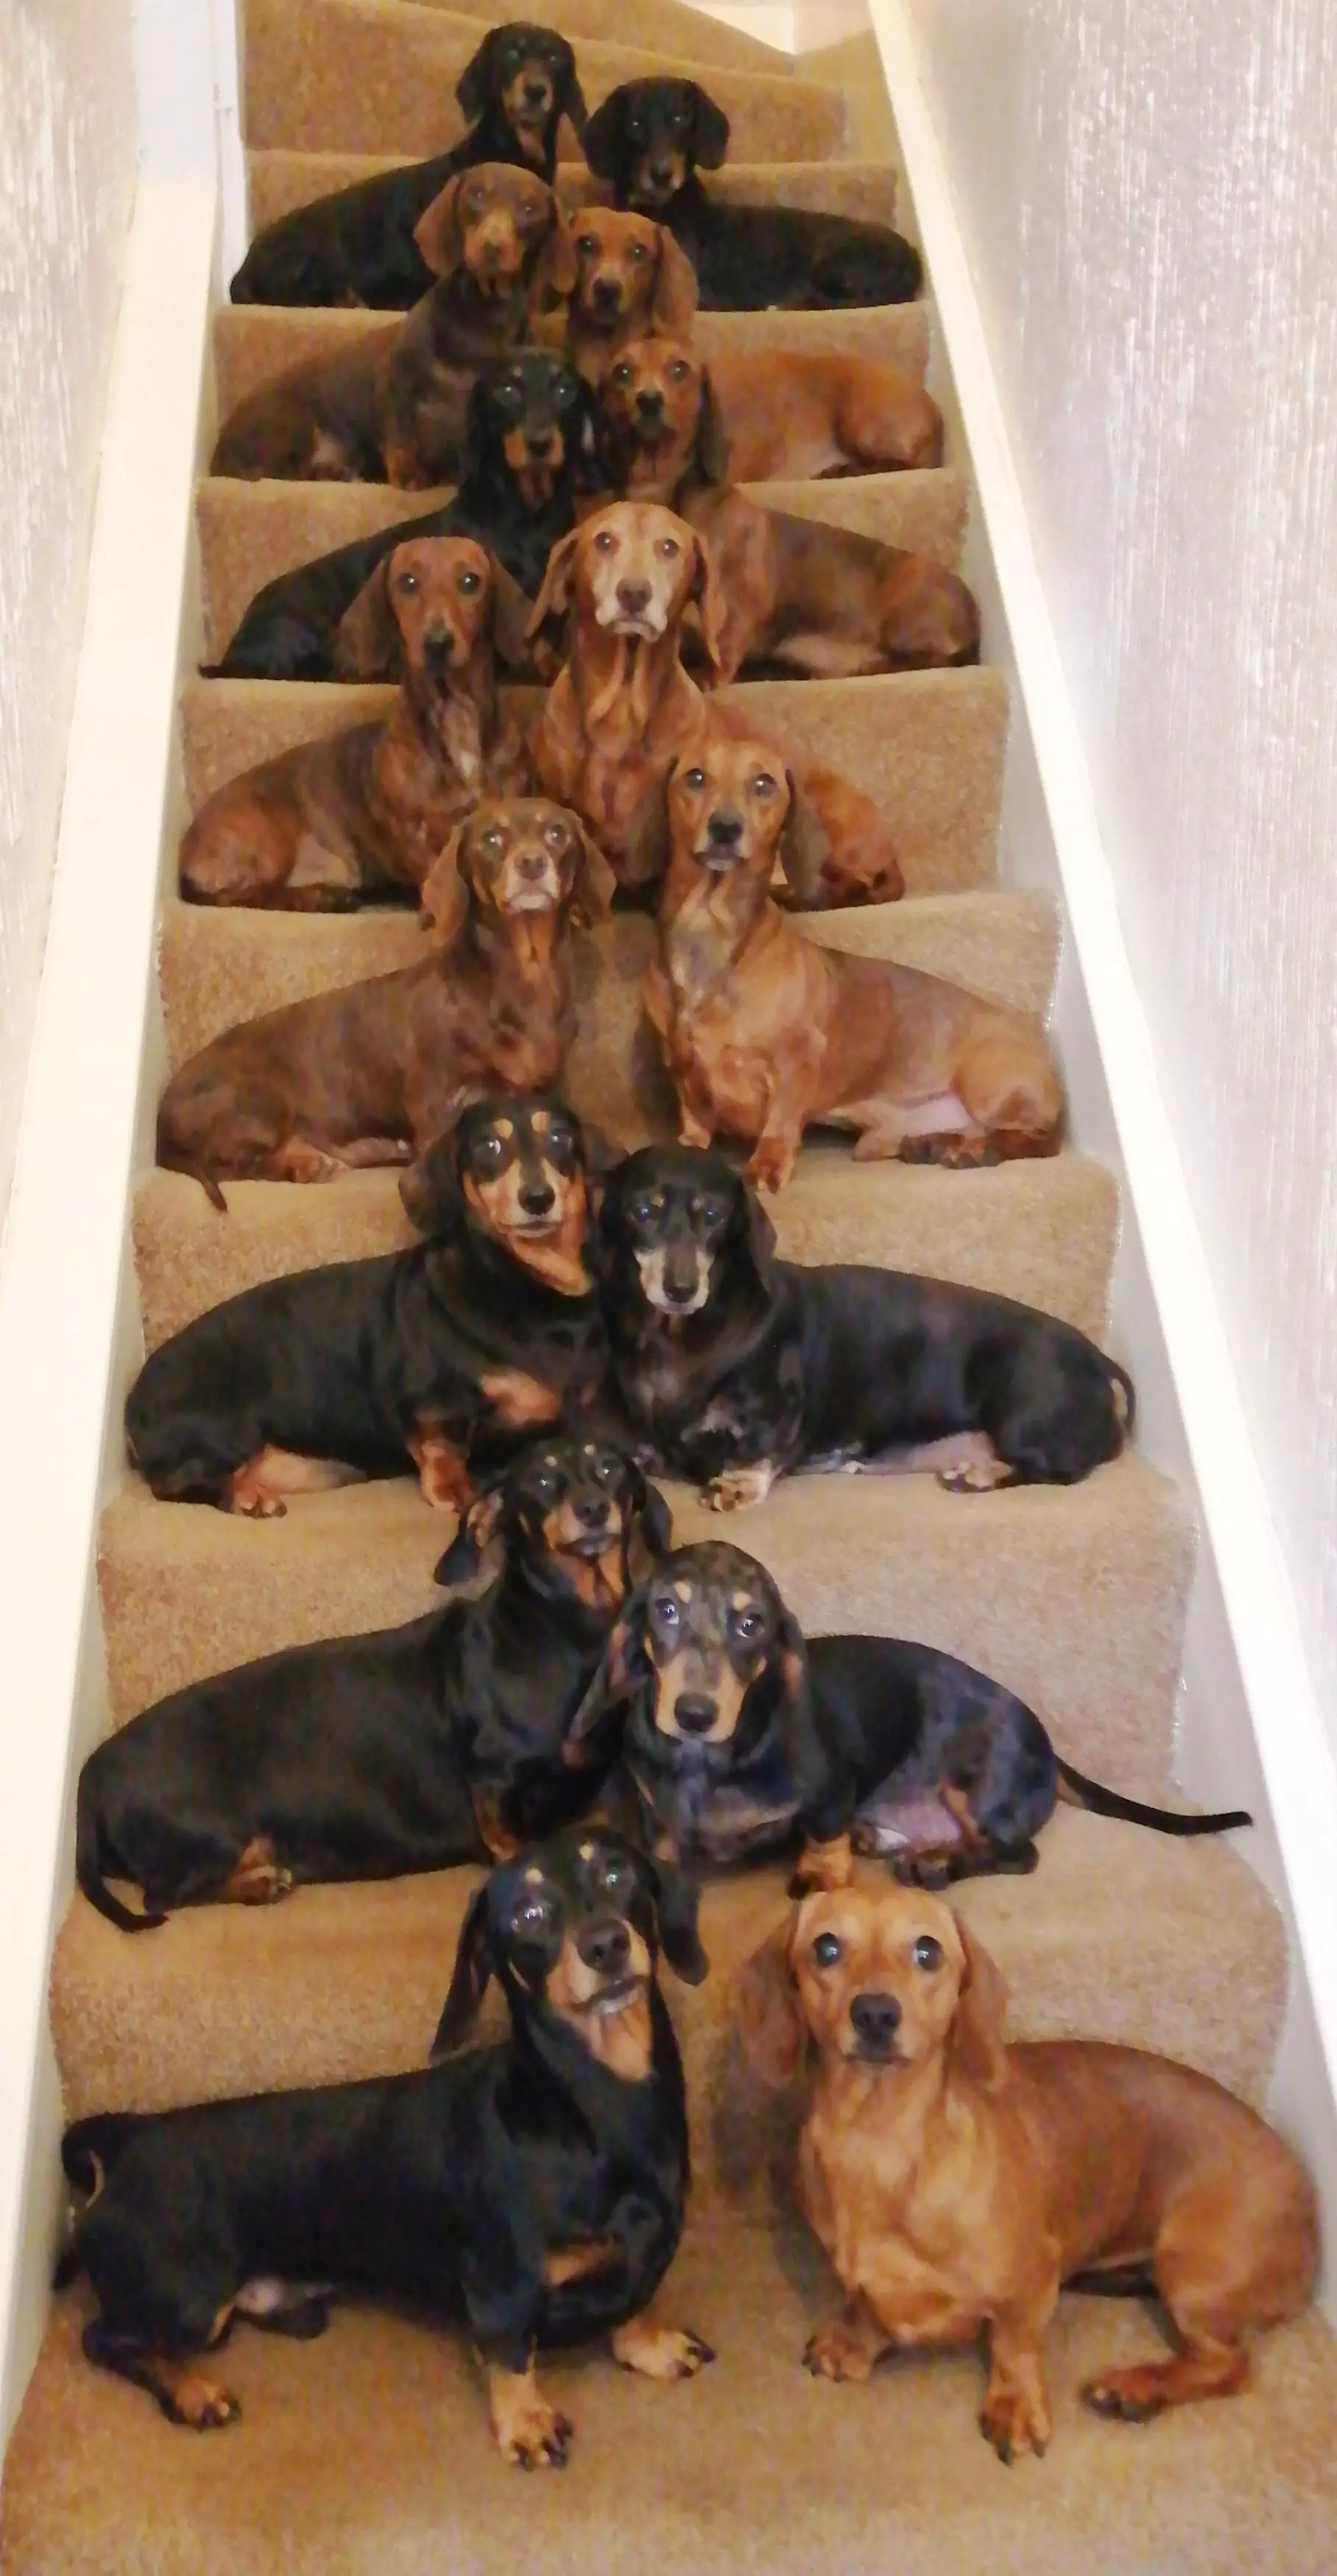 The 16 Dachshunds lined up for the snap.